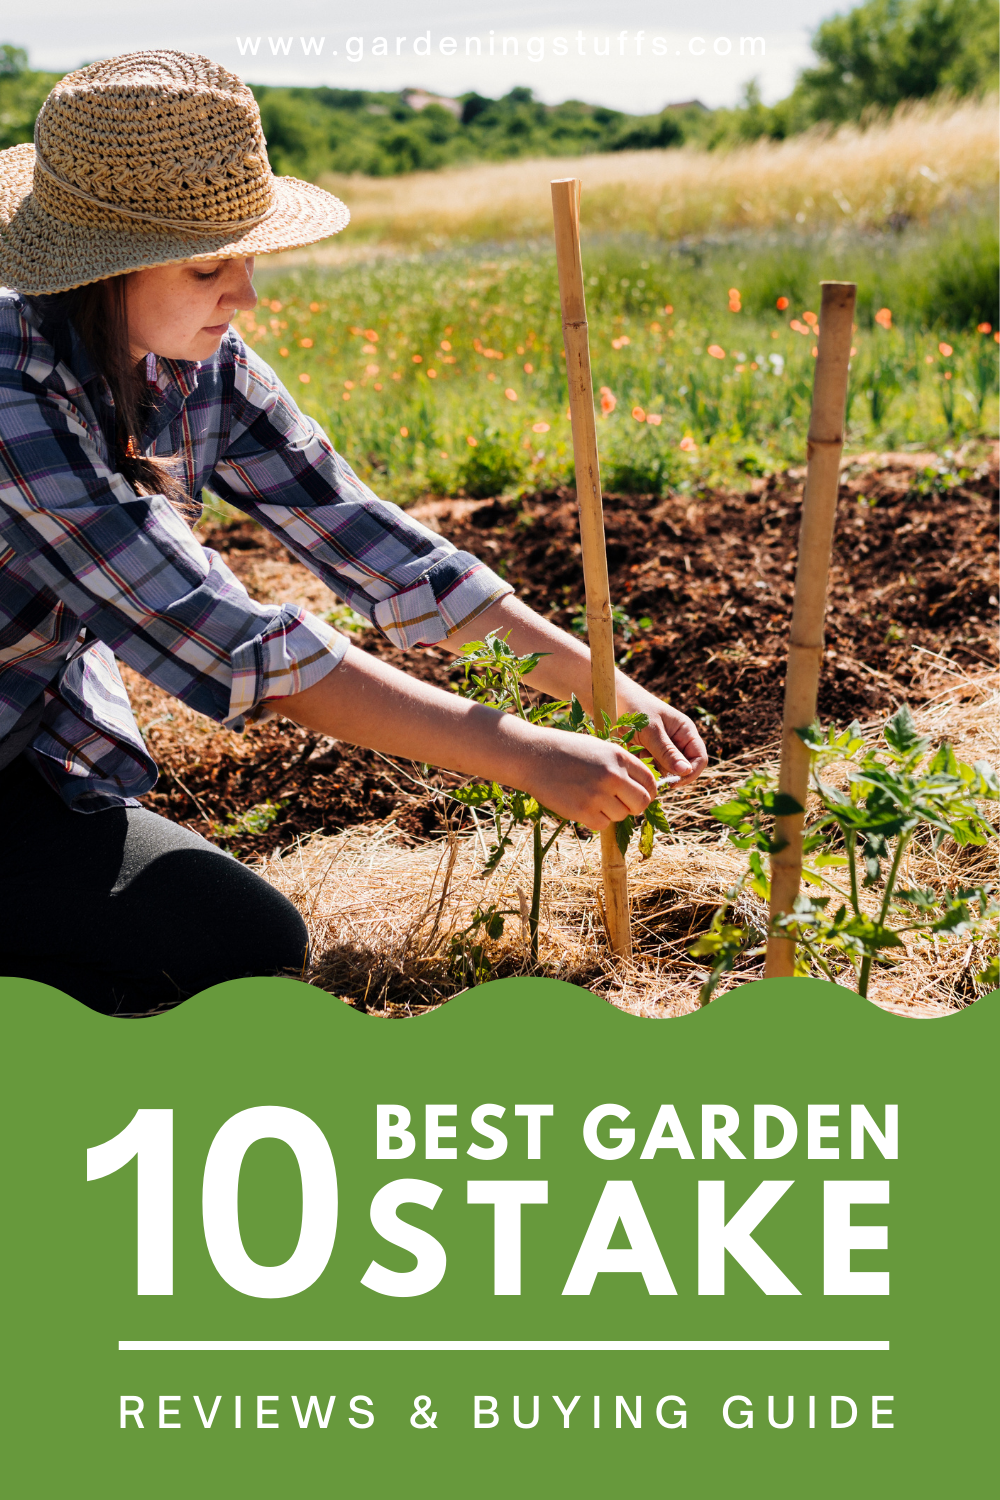 Garden stakes are used to support both weak and growing plants. Since the garden stakes need to protect the plants, they need to be made of strong materials such as bamboo, wooden, metal, etc. Check out this article, we’ve listed down the top selling garden stakes which have consistently received positive ratings by its users on Amazon and other online stores.